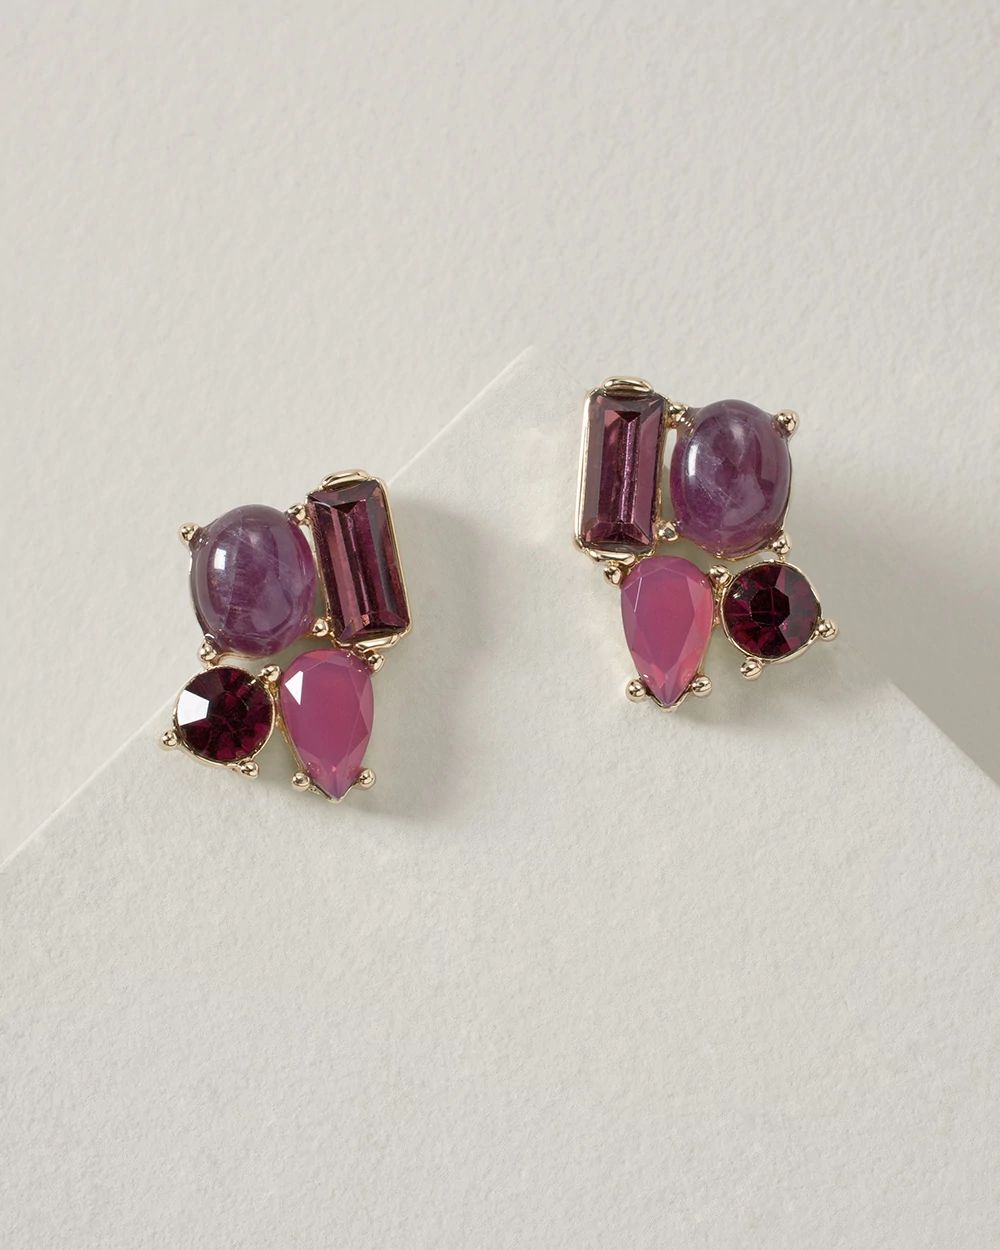 Goldtone & Plum Stud Earrings click to view larger image.